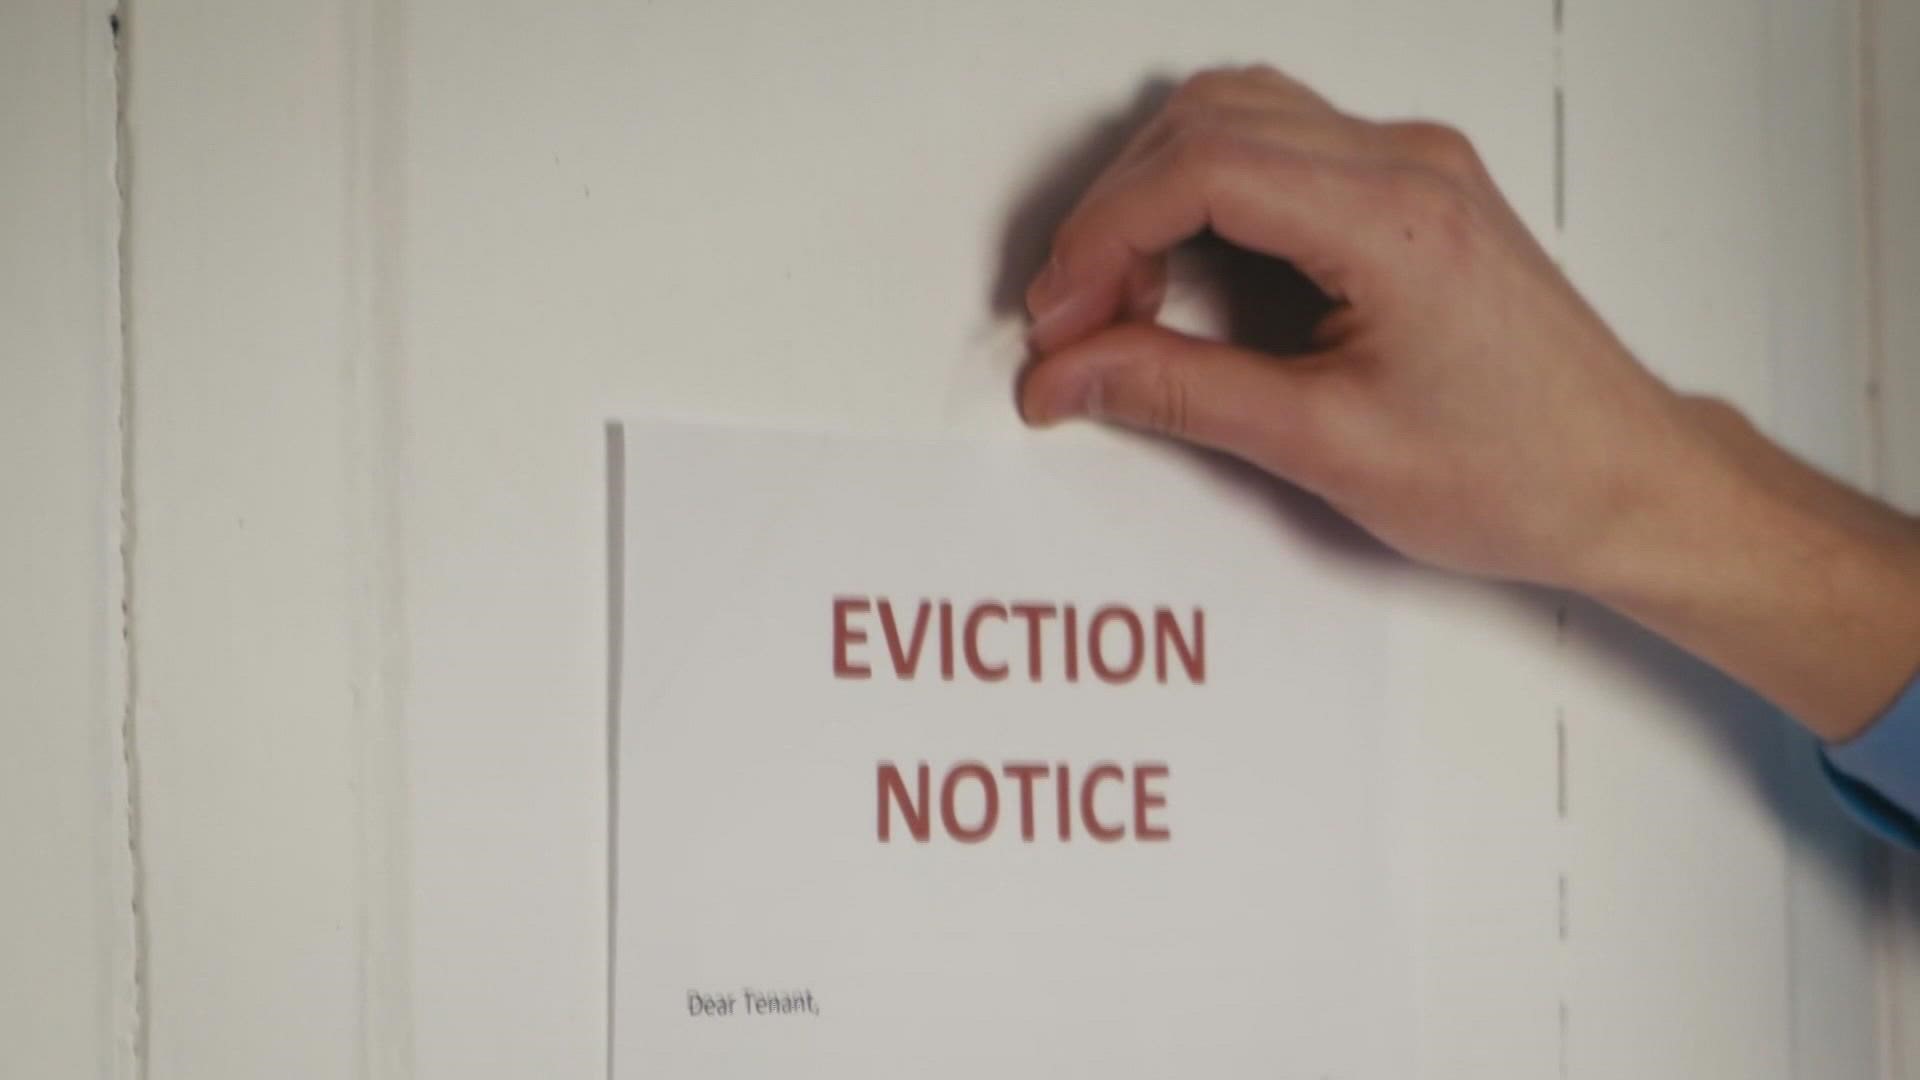 Maricopa County's courts remain busy with a high amount of eviction cases. But a new state law lets tenants seal eviction records if the case ends in their favor.